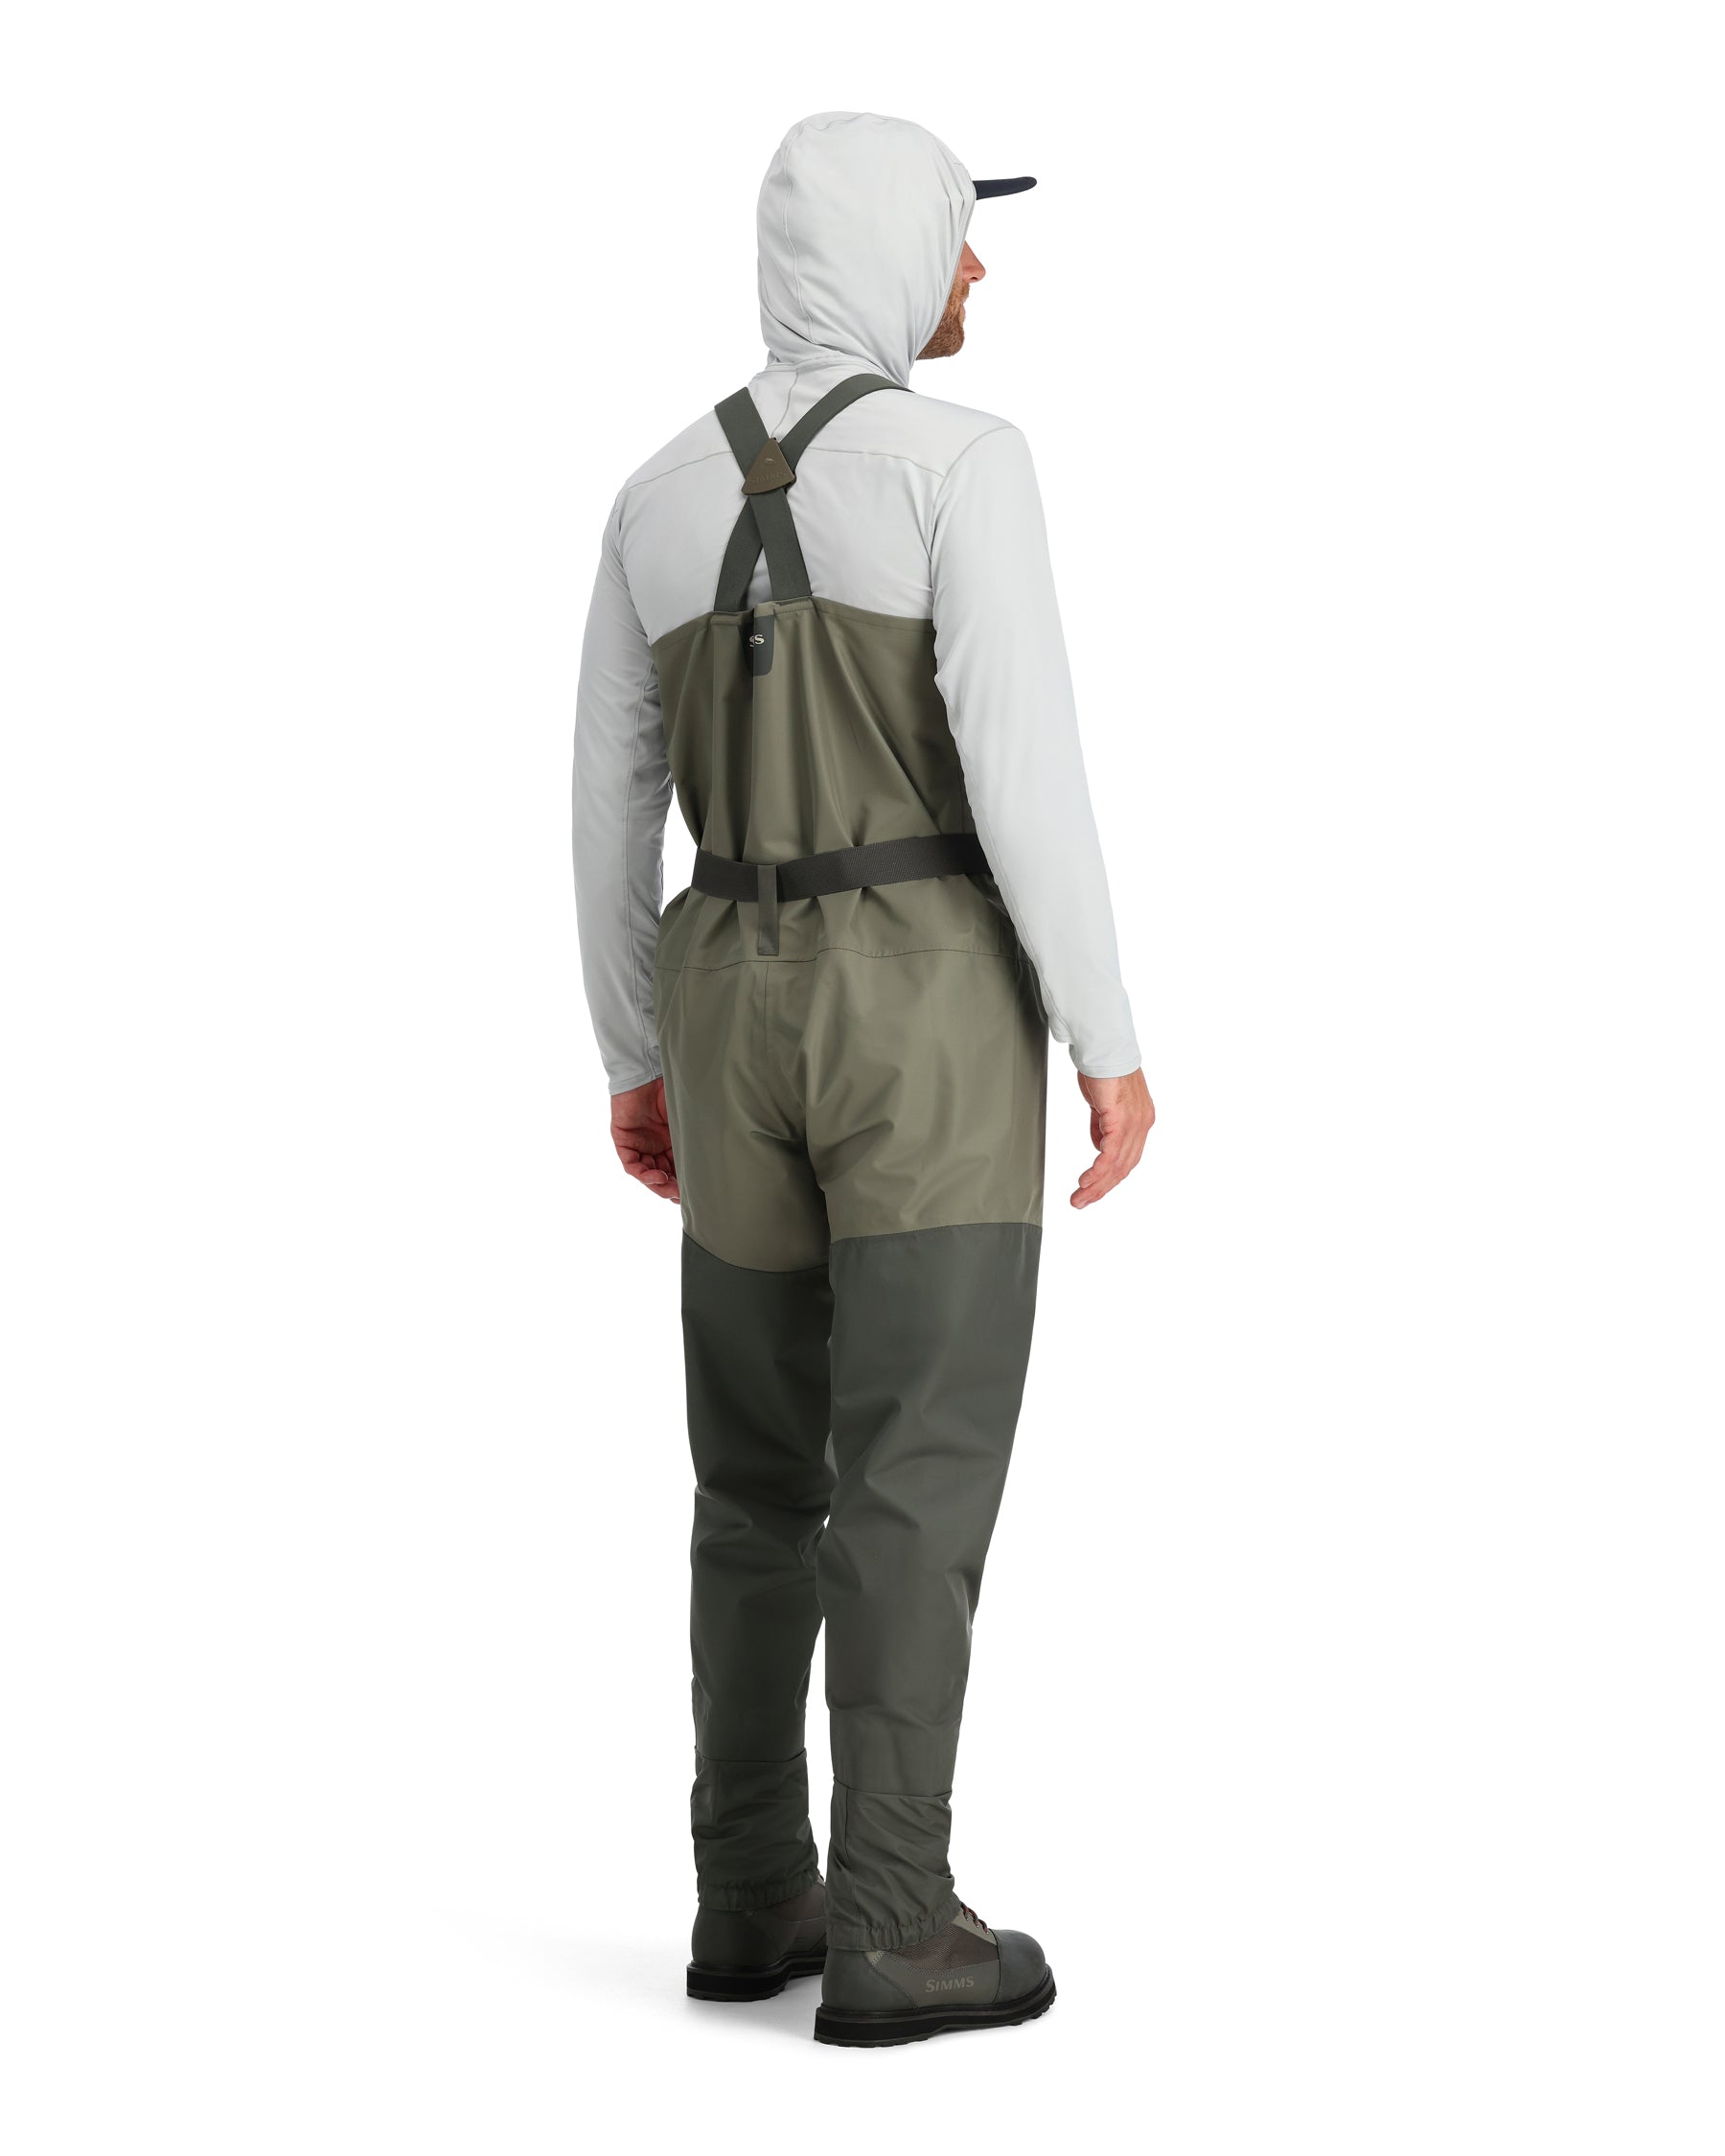 Simms M's Tributary (23) Wader